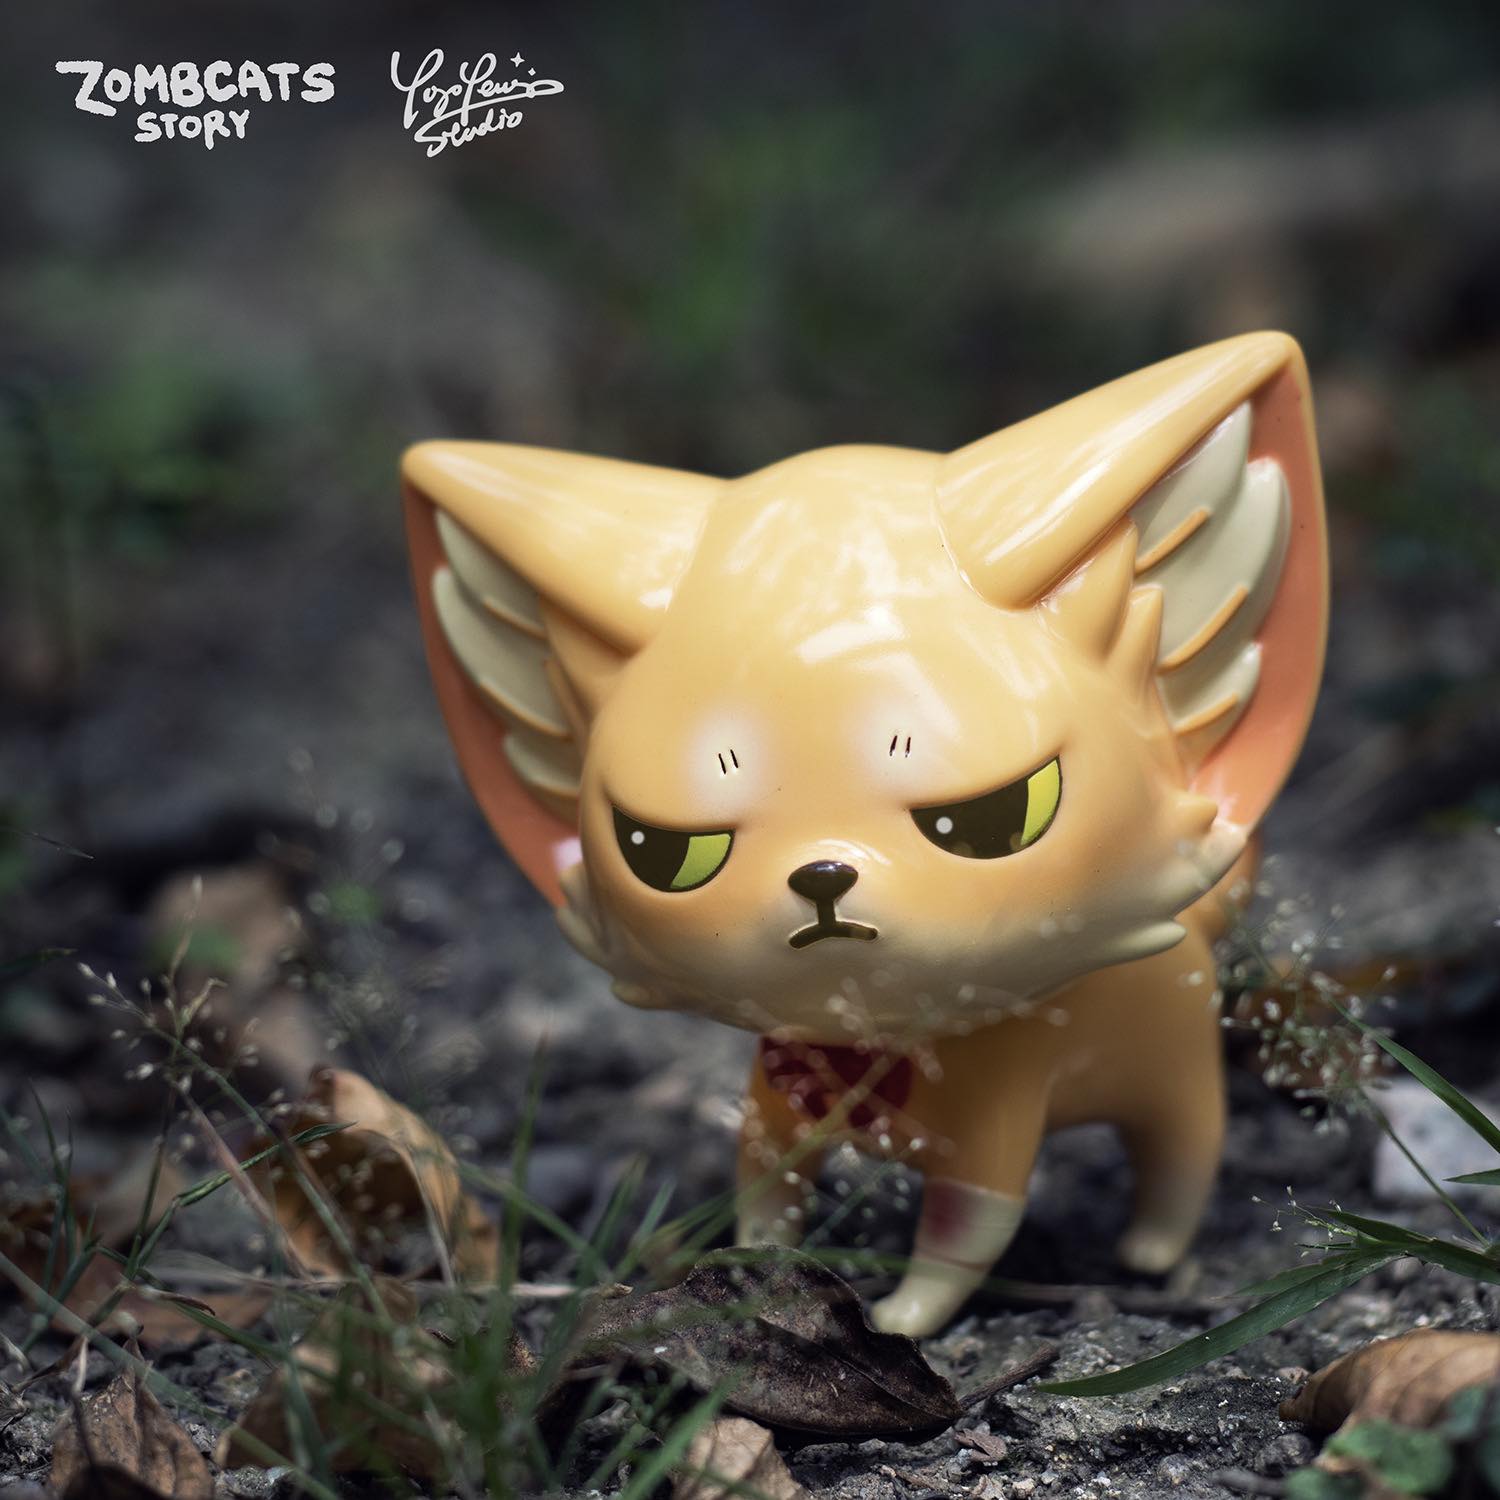 A limited edition Zombcat figurine by Morimei X Yoyo Yeung Studio, featuring Doomsday Biology Atlas and Doomsday Fox Kenneth. Soft vinyl, 7cm, limited to 100pcs. Available in North America only.